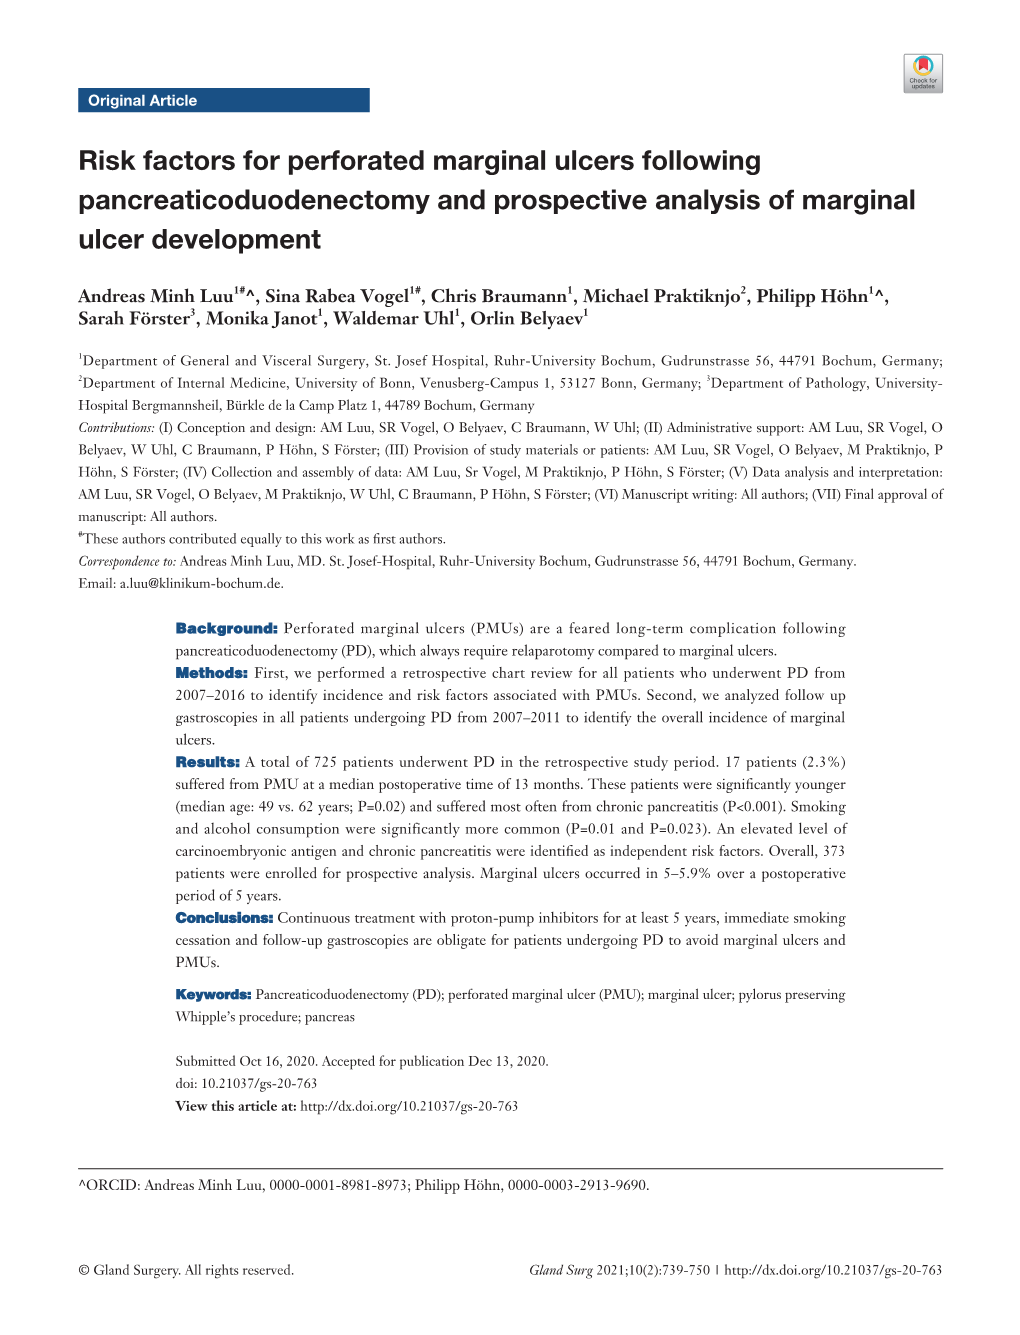 Risk Factors for Perforated Marginal Ulcers Following Pancreaticoduodenectomy and Prospective Analysis of Marginal Ulcer Development